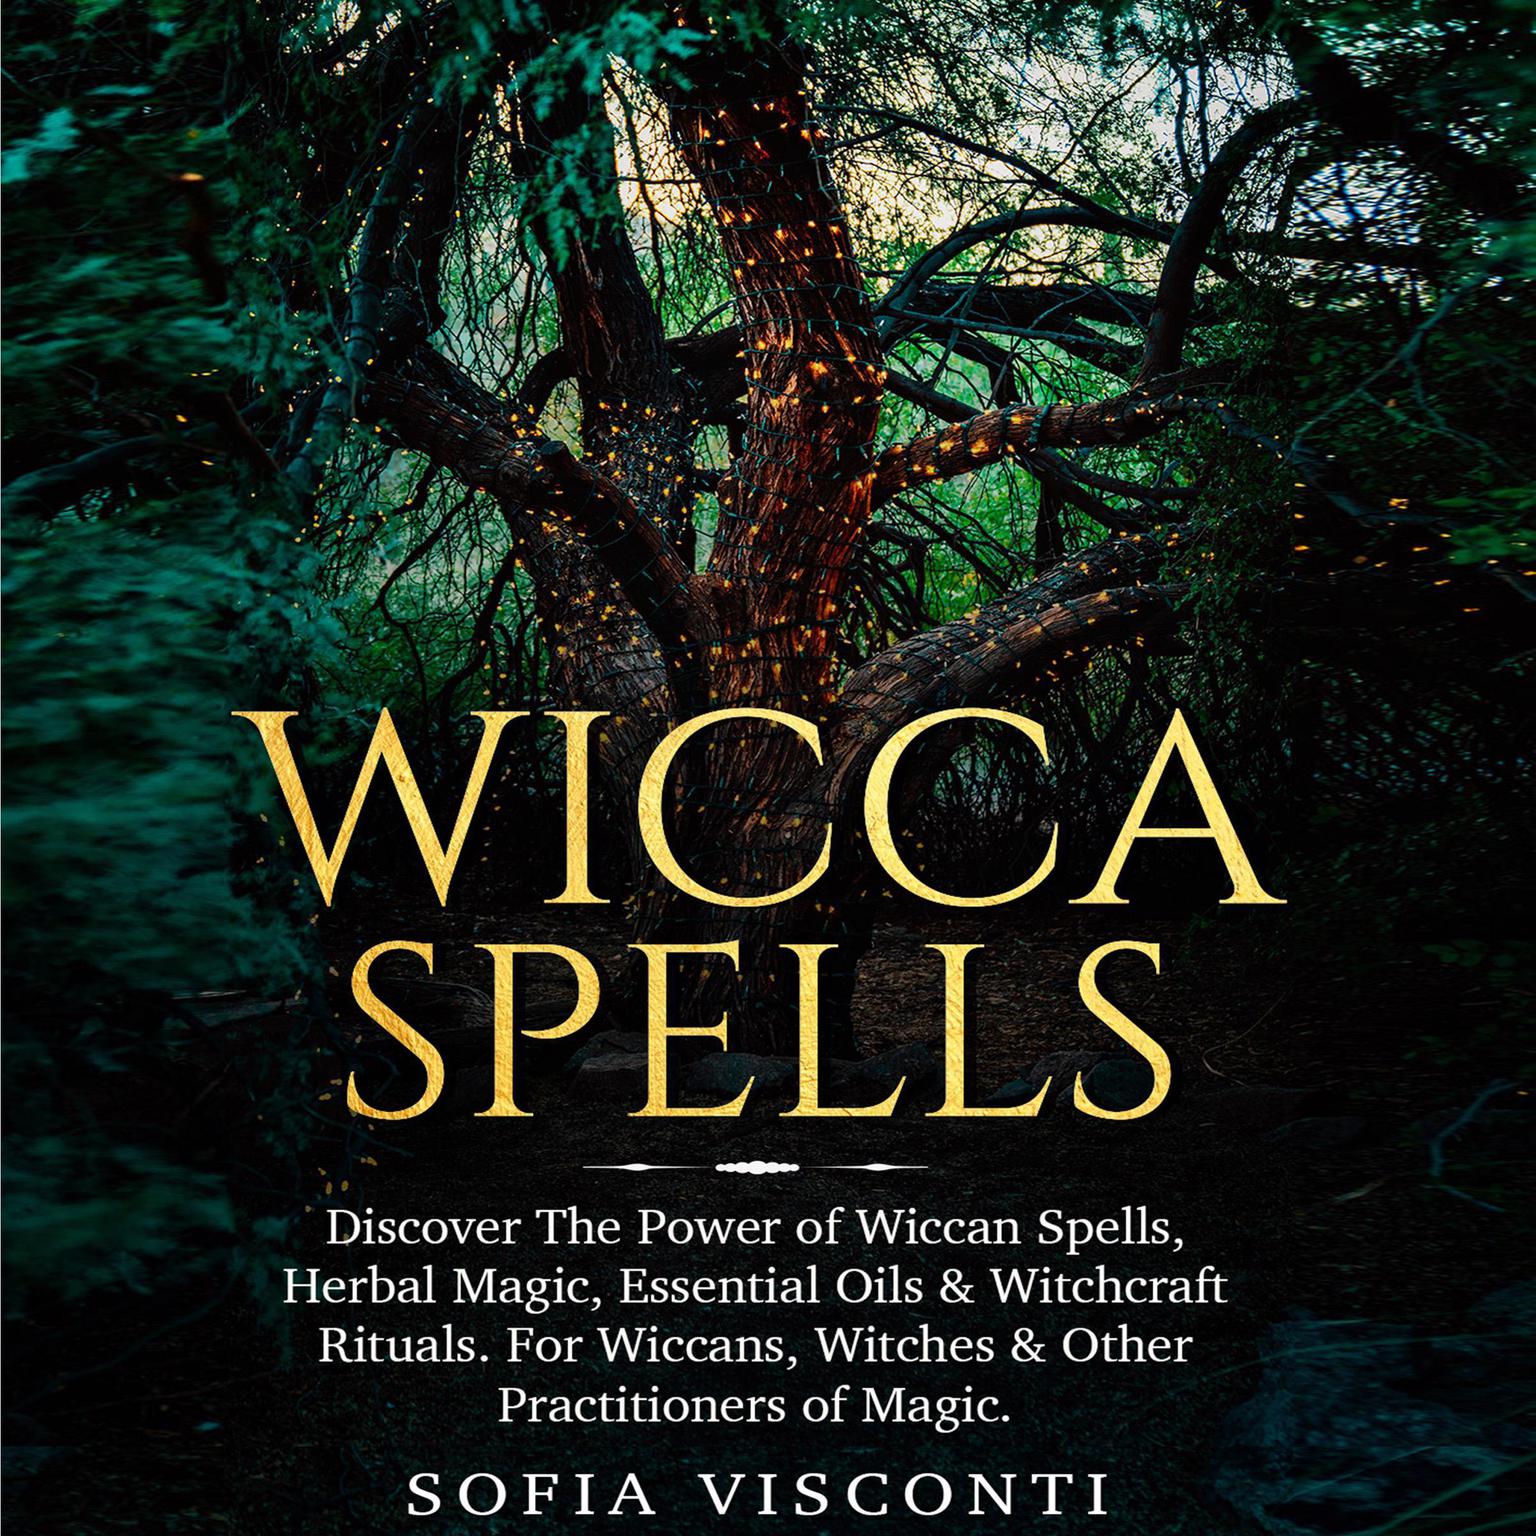 Wicca Spells: Discover the Power of Wiccan Spells, Herbal Magic, Essential Oils & Witchcraft Rituals. For Wiccans, Witches & Other Practitioners of Magic Audiobook, by Sofia Visconti